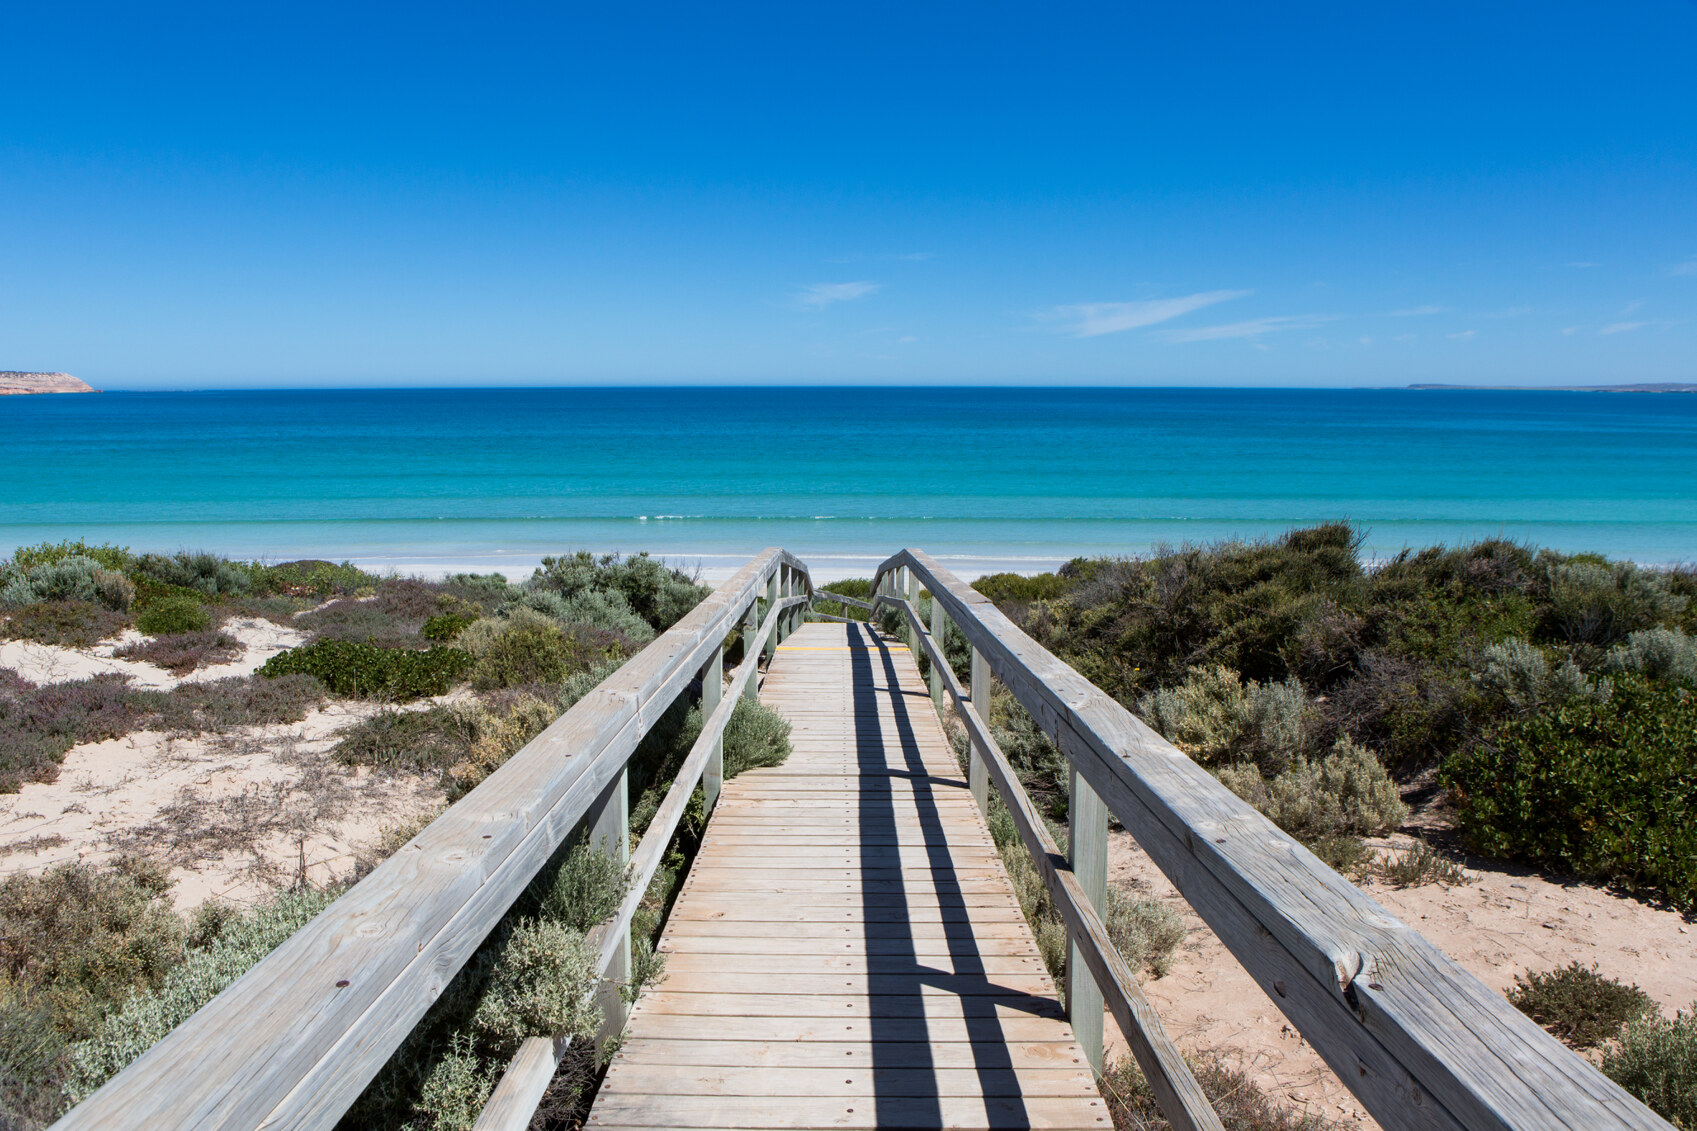 Boardwalk leading to Streaky Bay Eyre Peninsula South Australia on a bright and sunny day